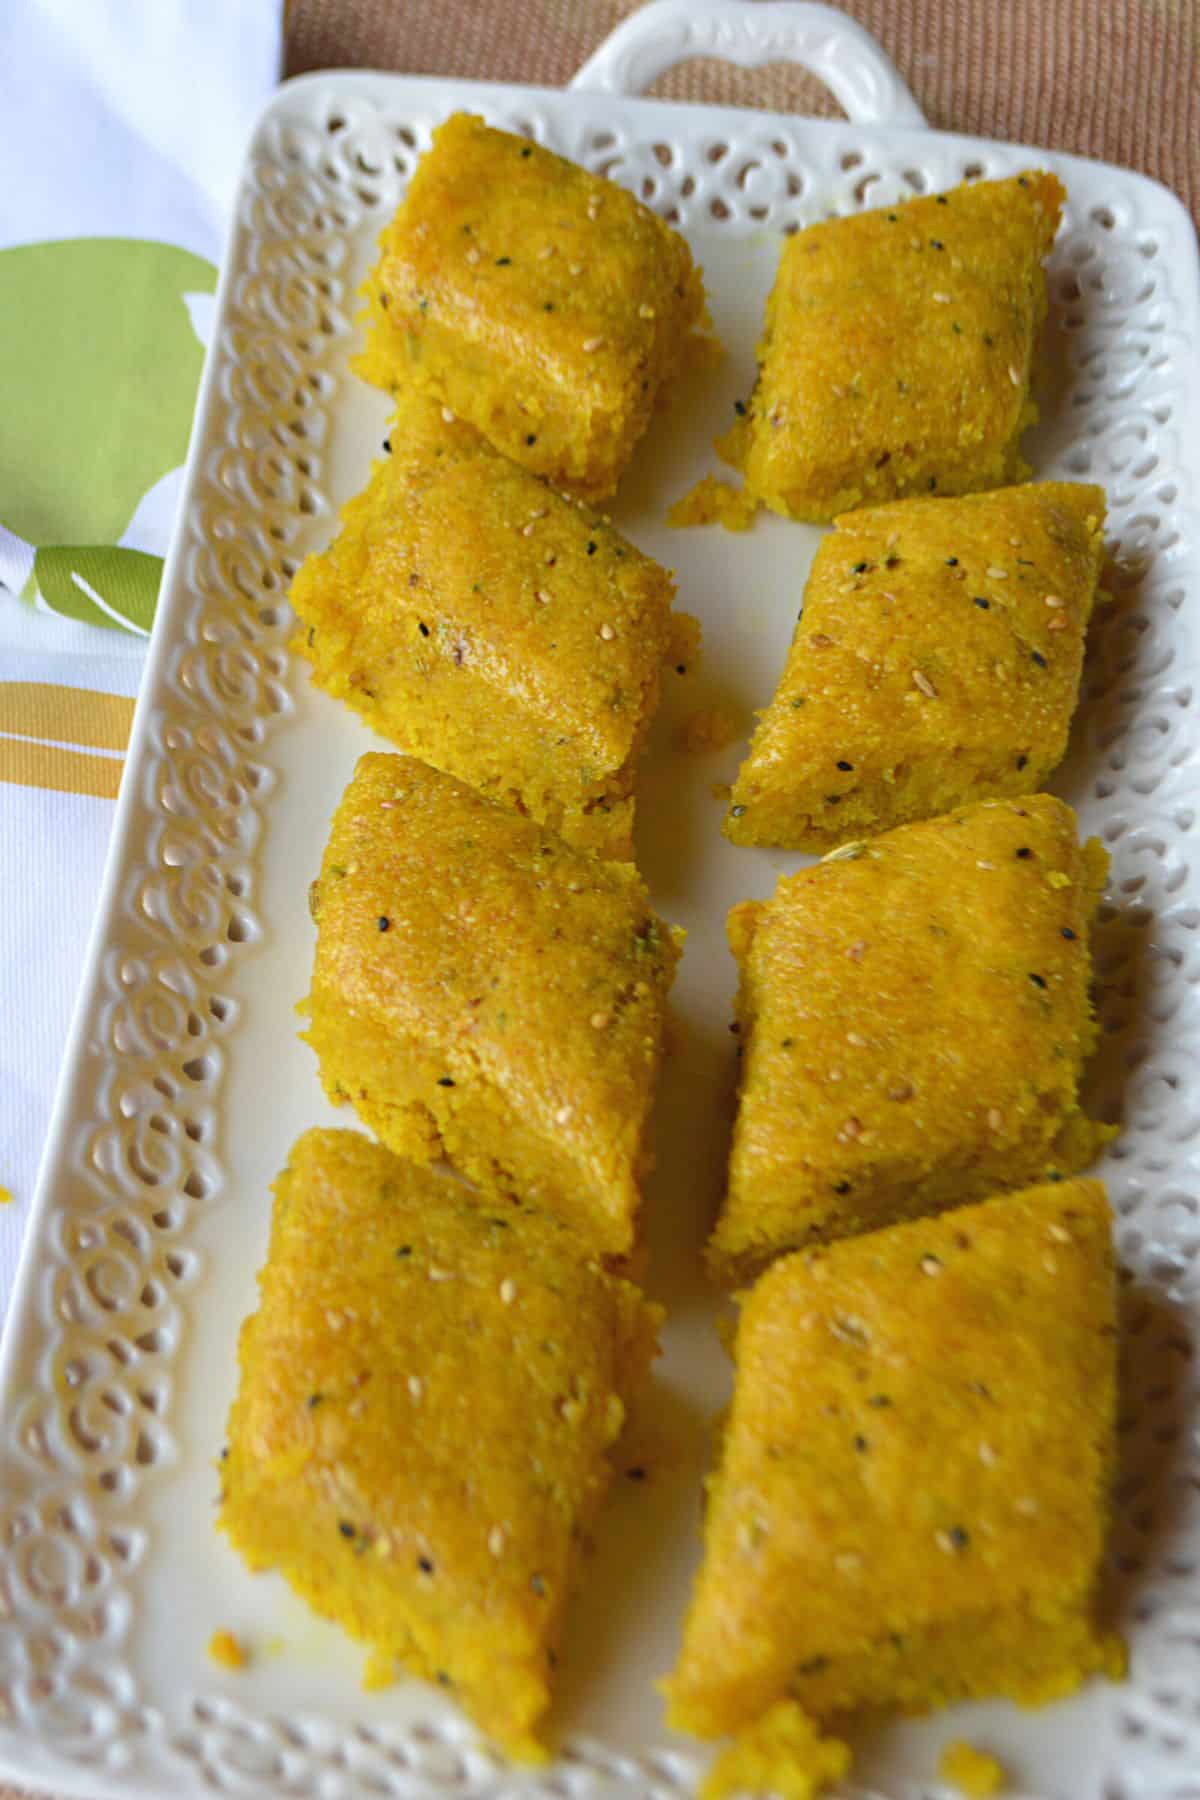 Turmeric cake squares on a white plate.